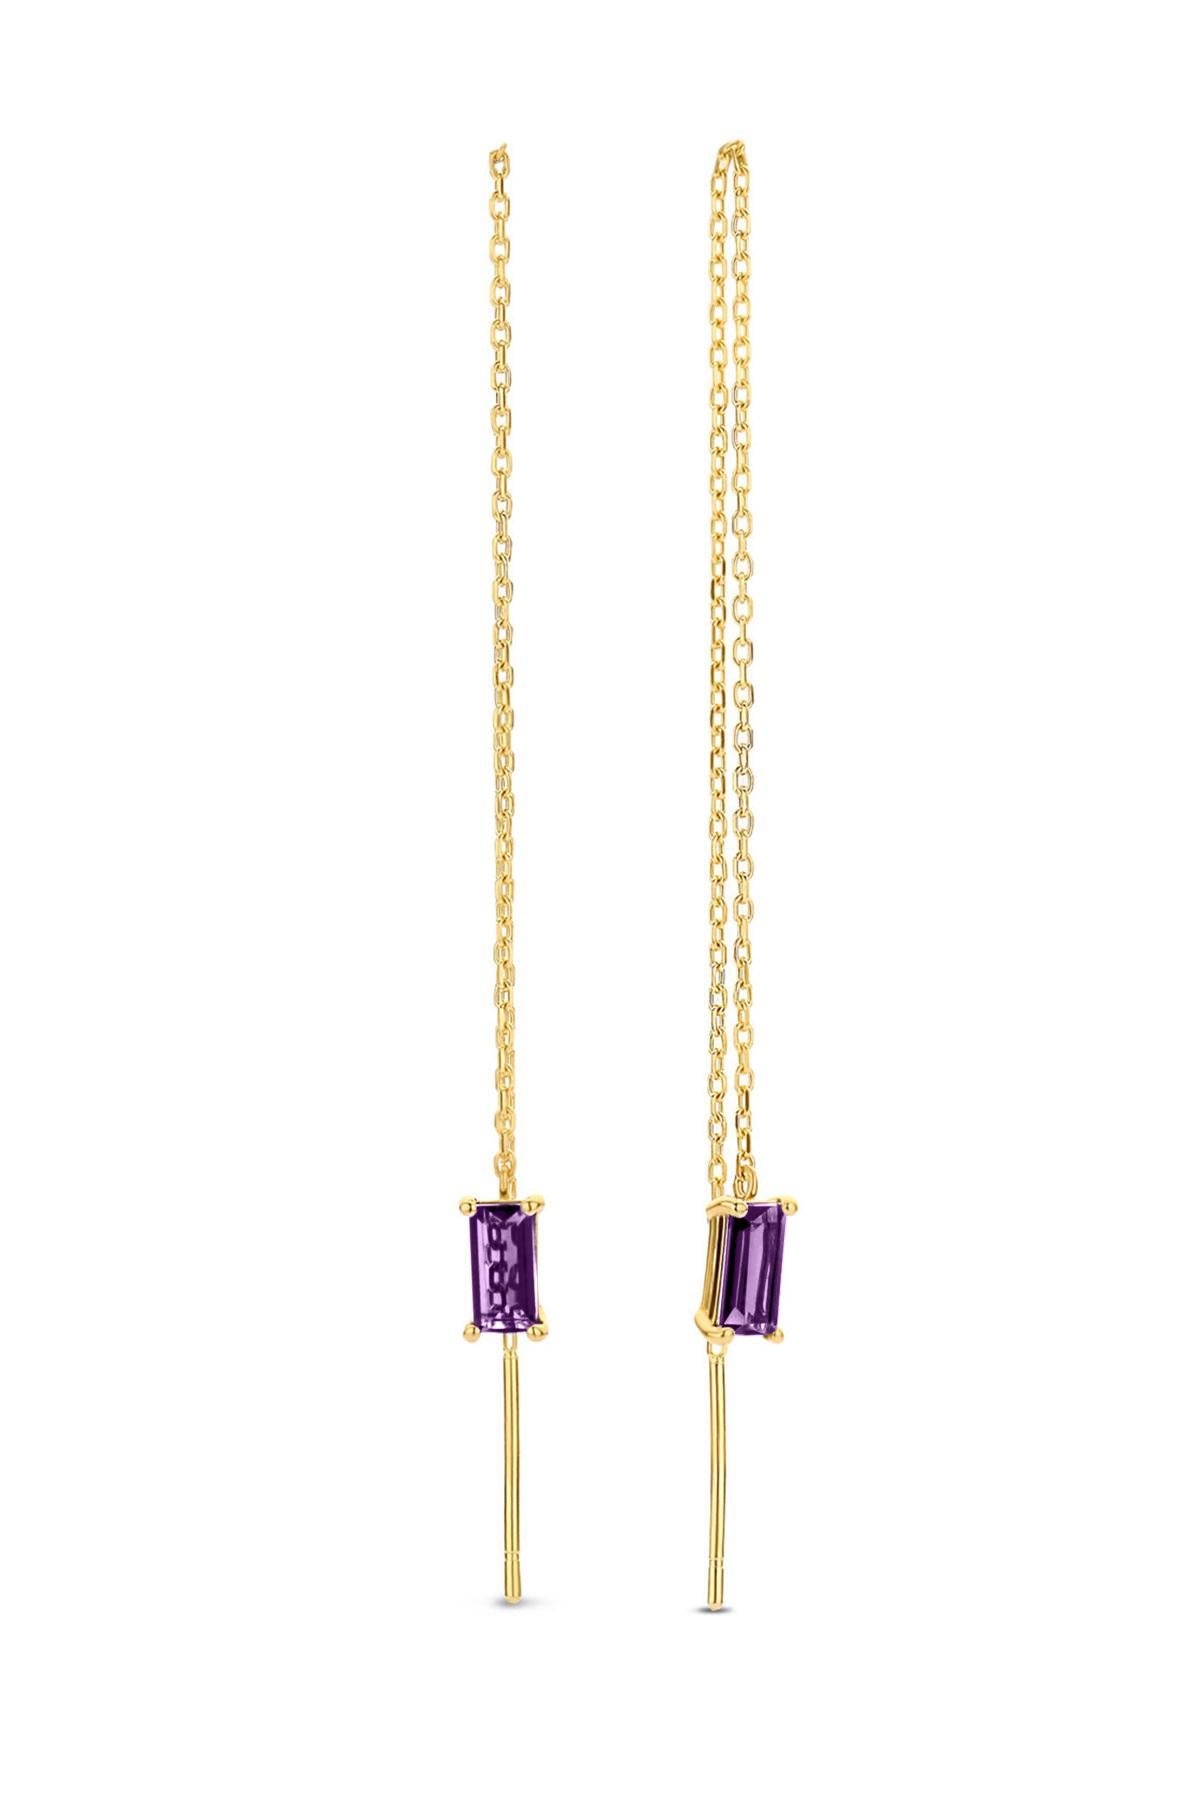 Modern 14k Solid Gold Drop Earrings with amethyst.  For Sale